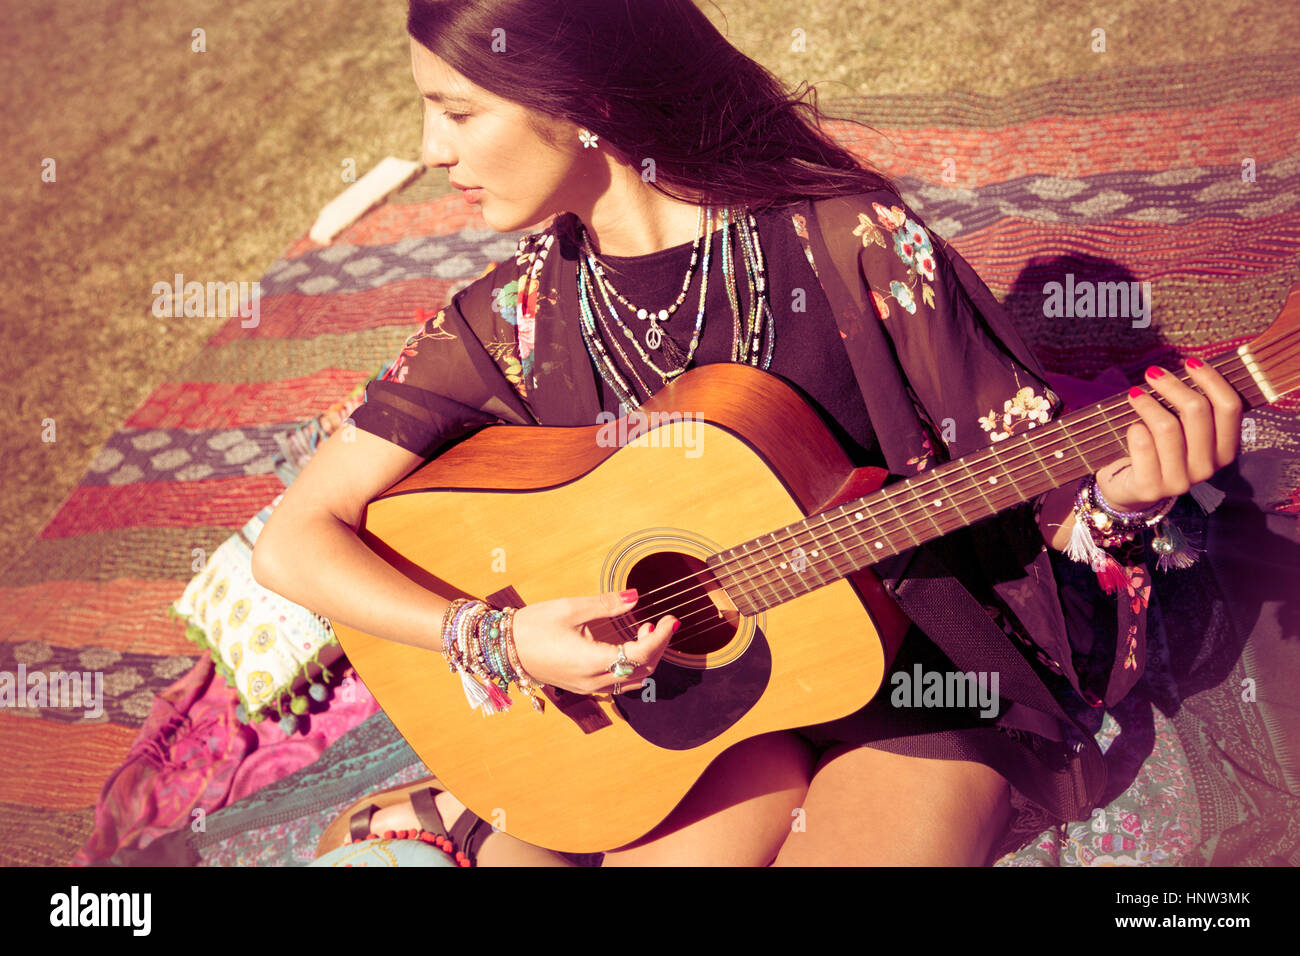 Asian woman sitting on blanket playing guitar Stock Photo